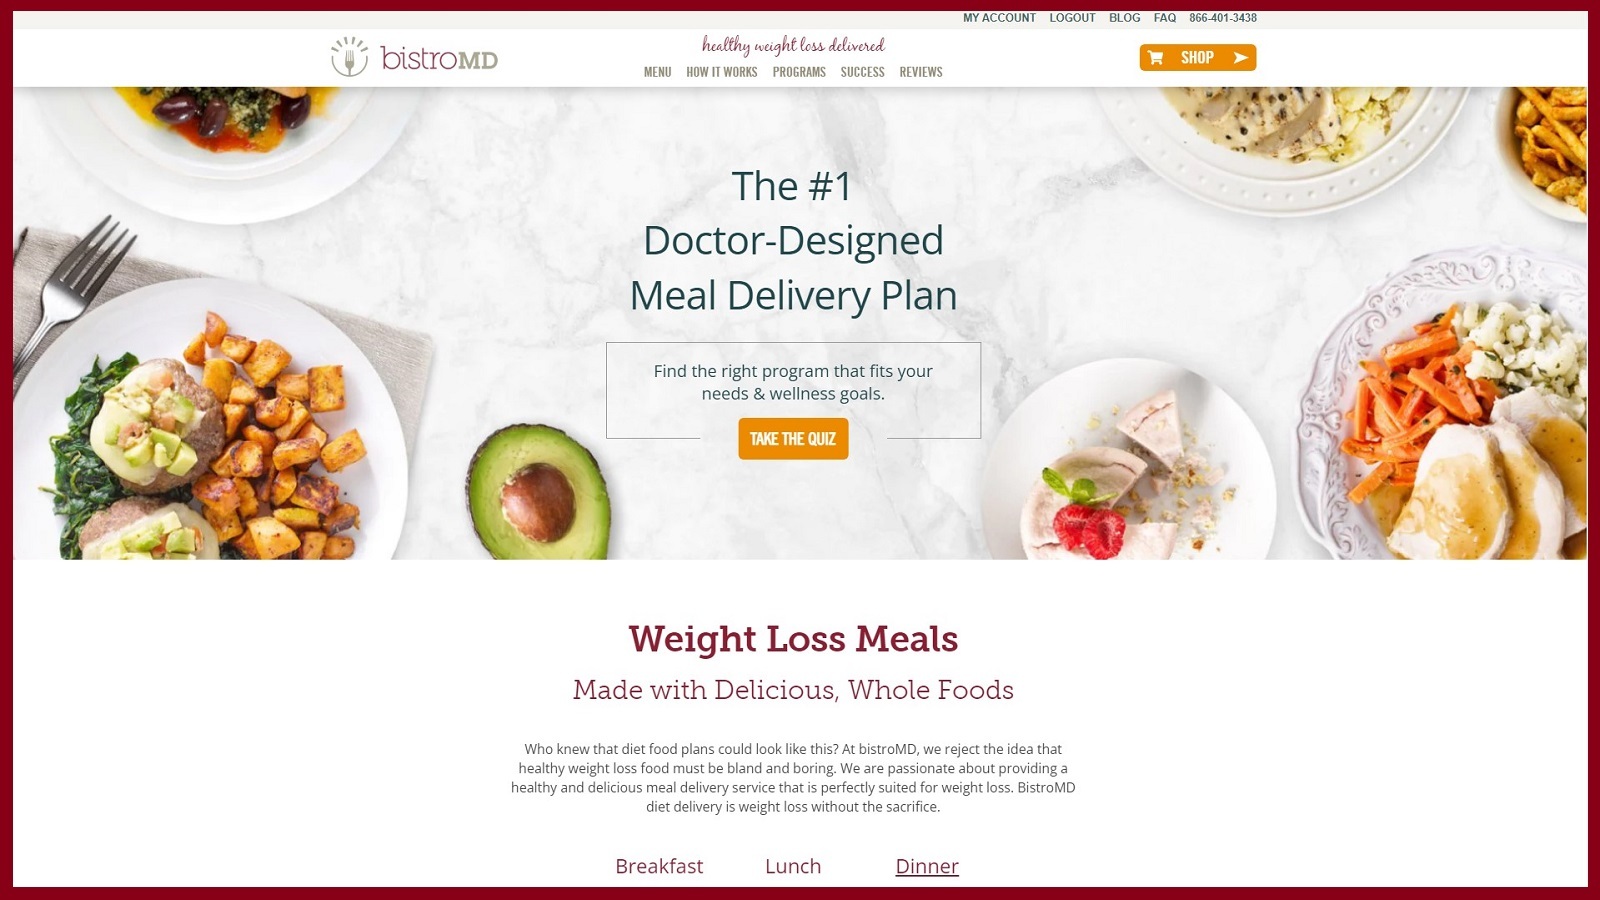 BistroMD Review: Should You Purchase Their Dietary Meal Delivery?